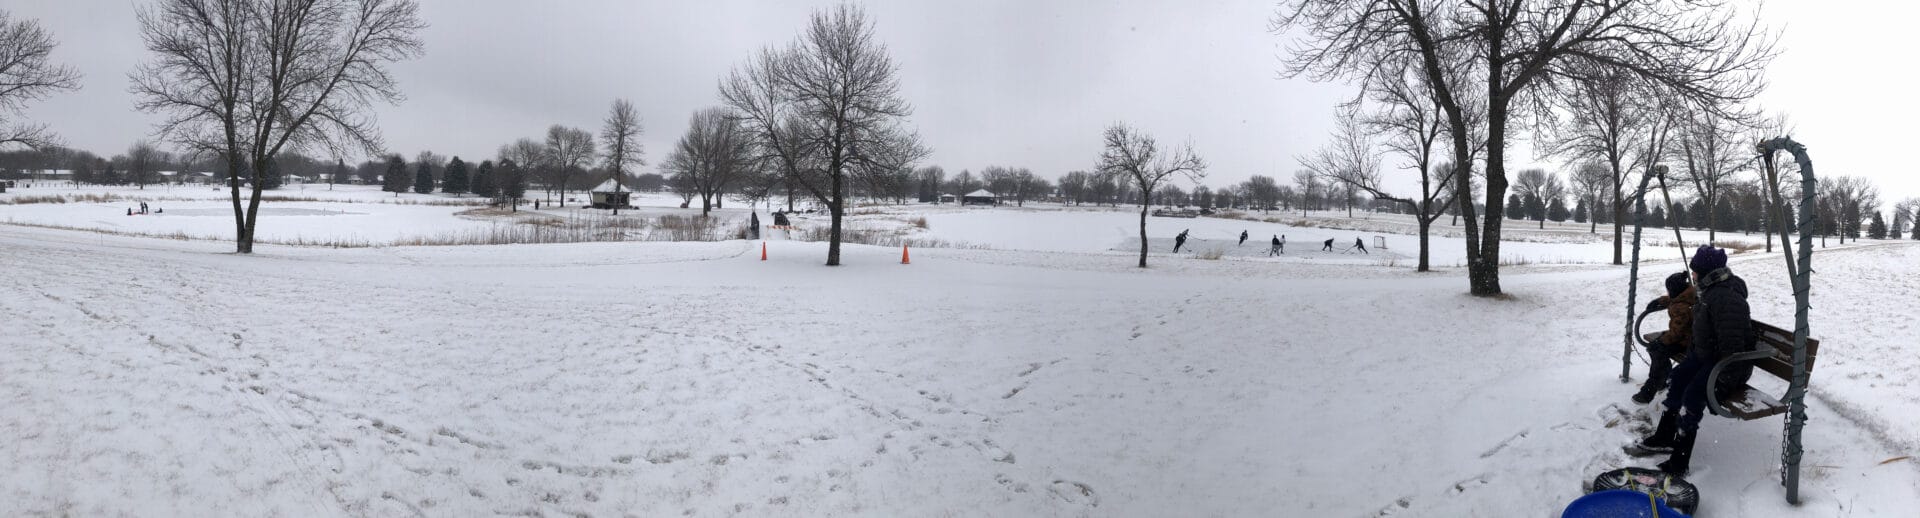 Independence Park Winter Pano